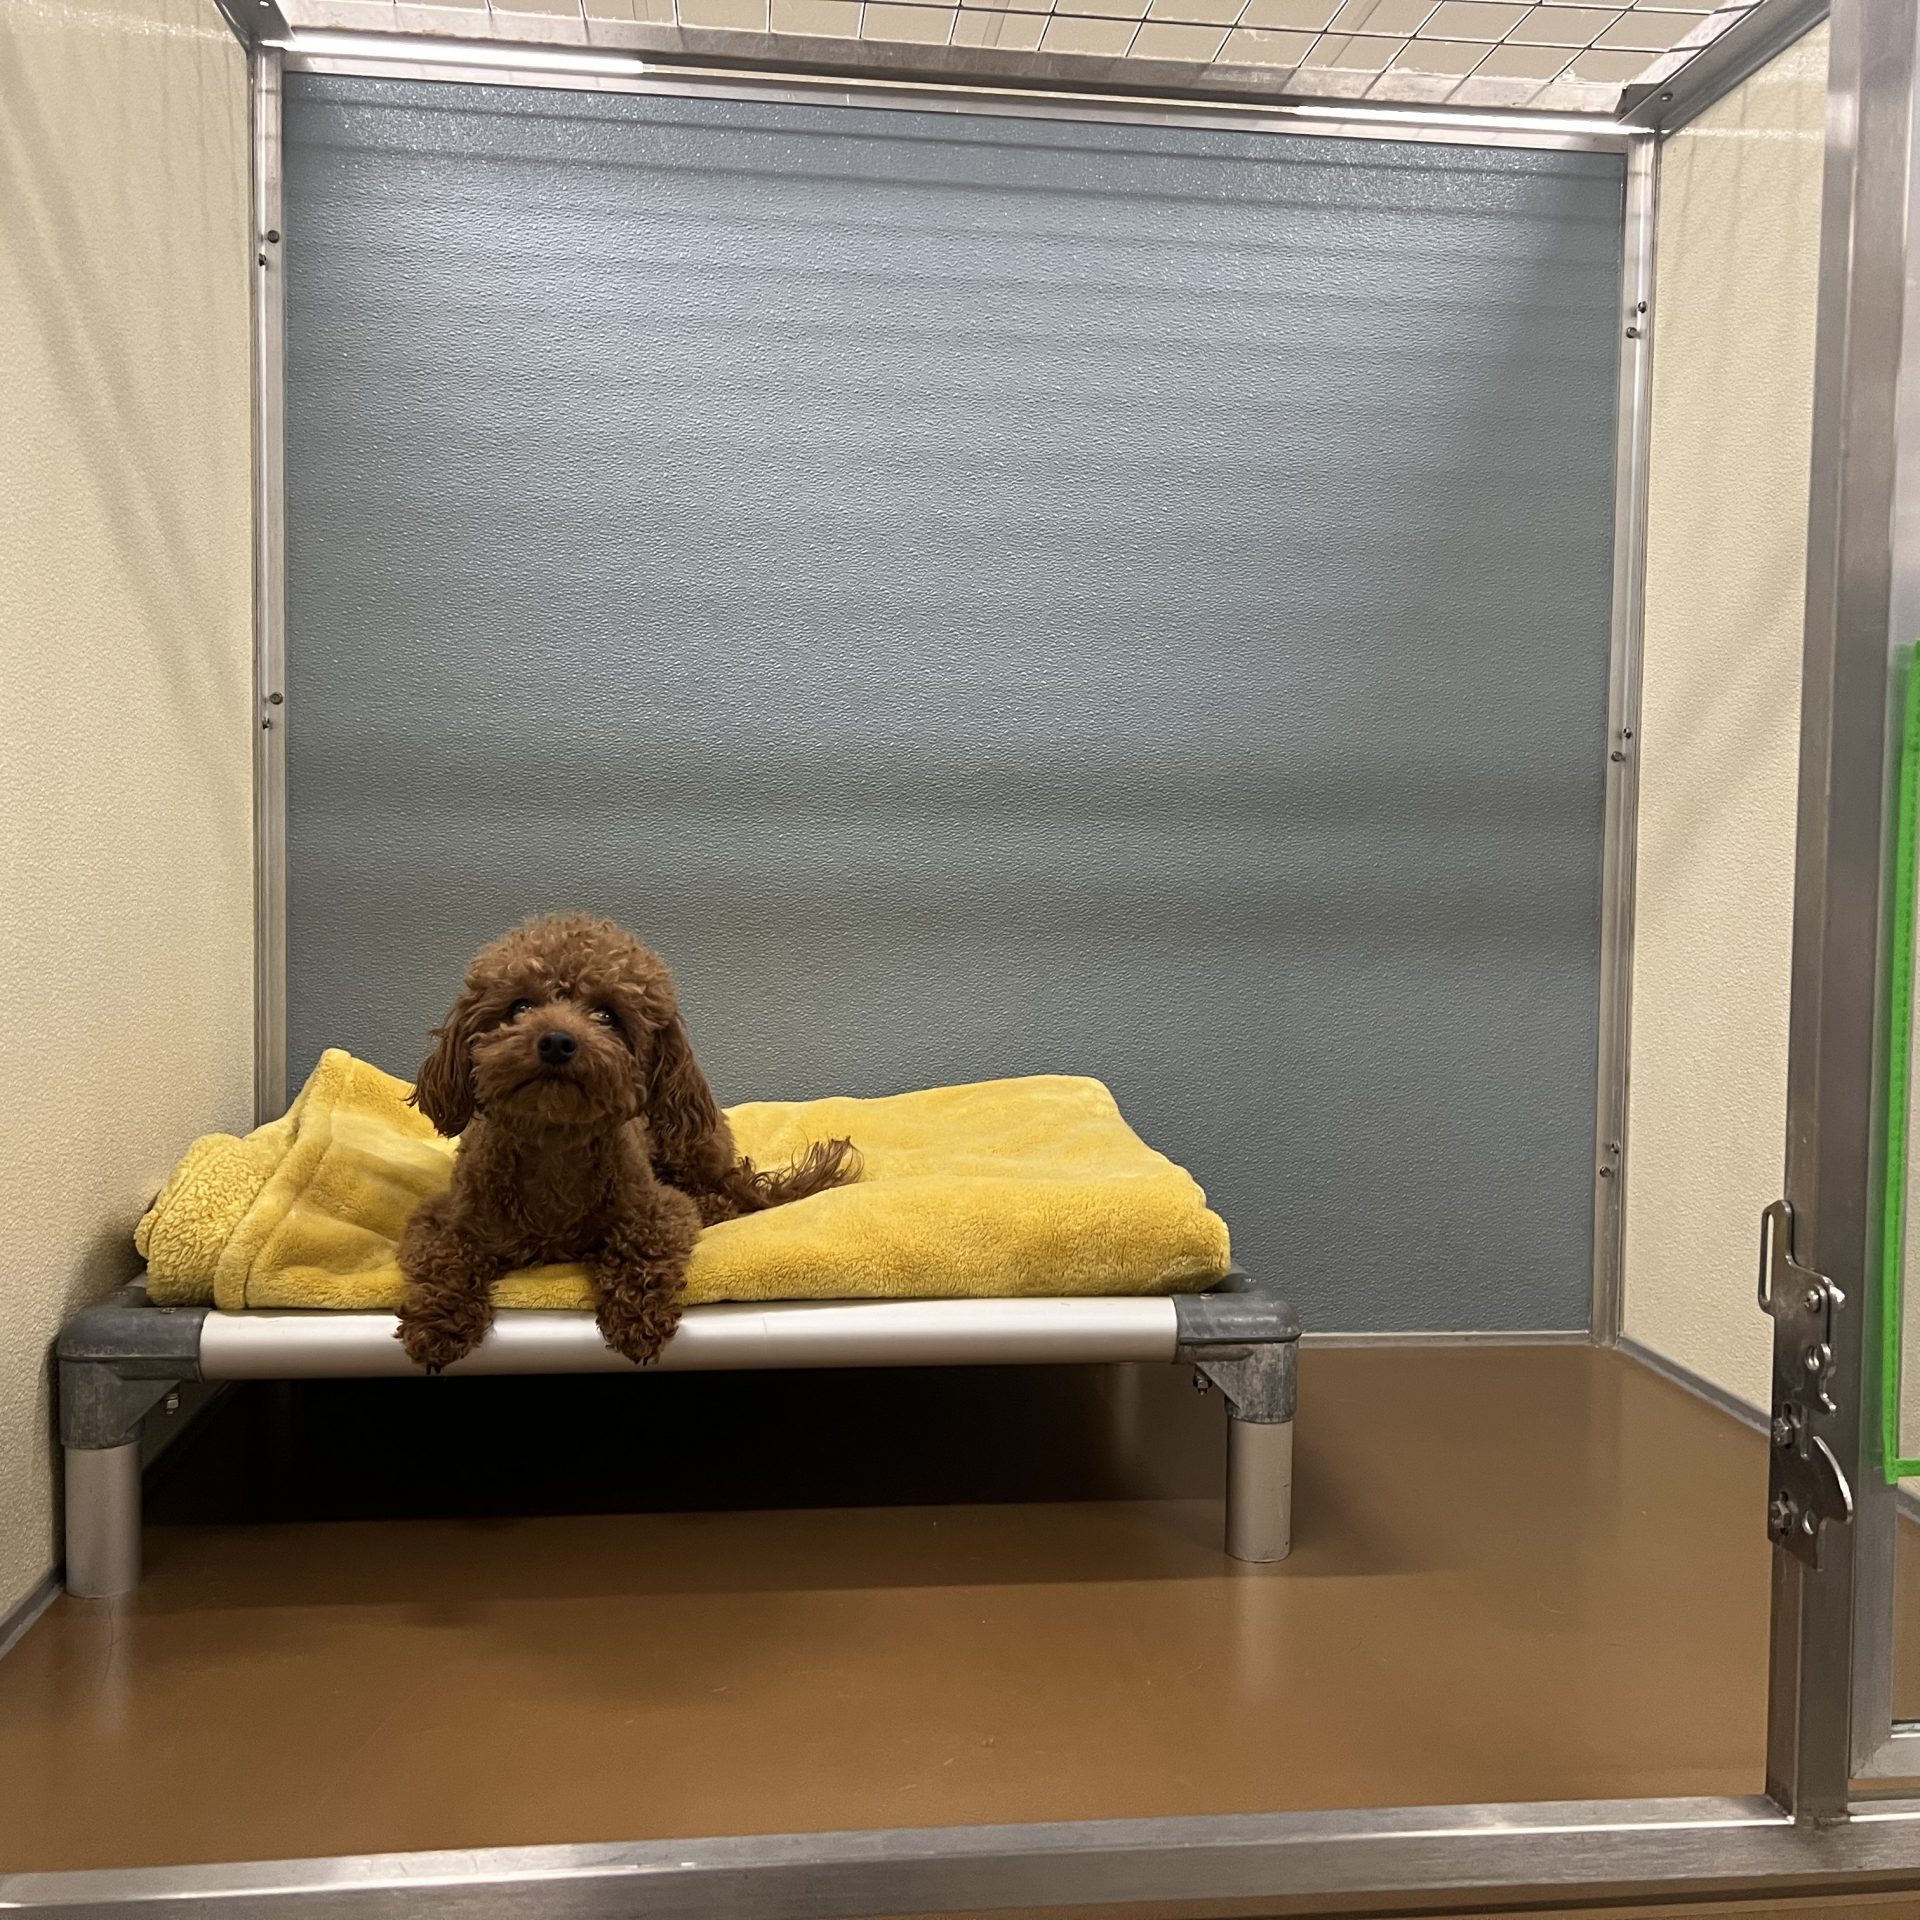 Small brown dog laying on yellow blanket in cot-style bed